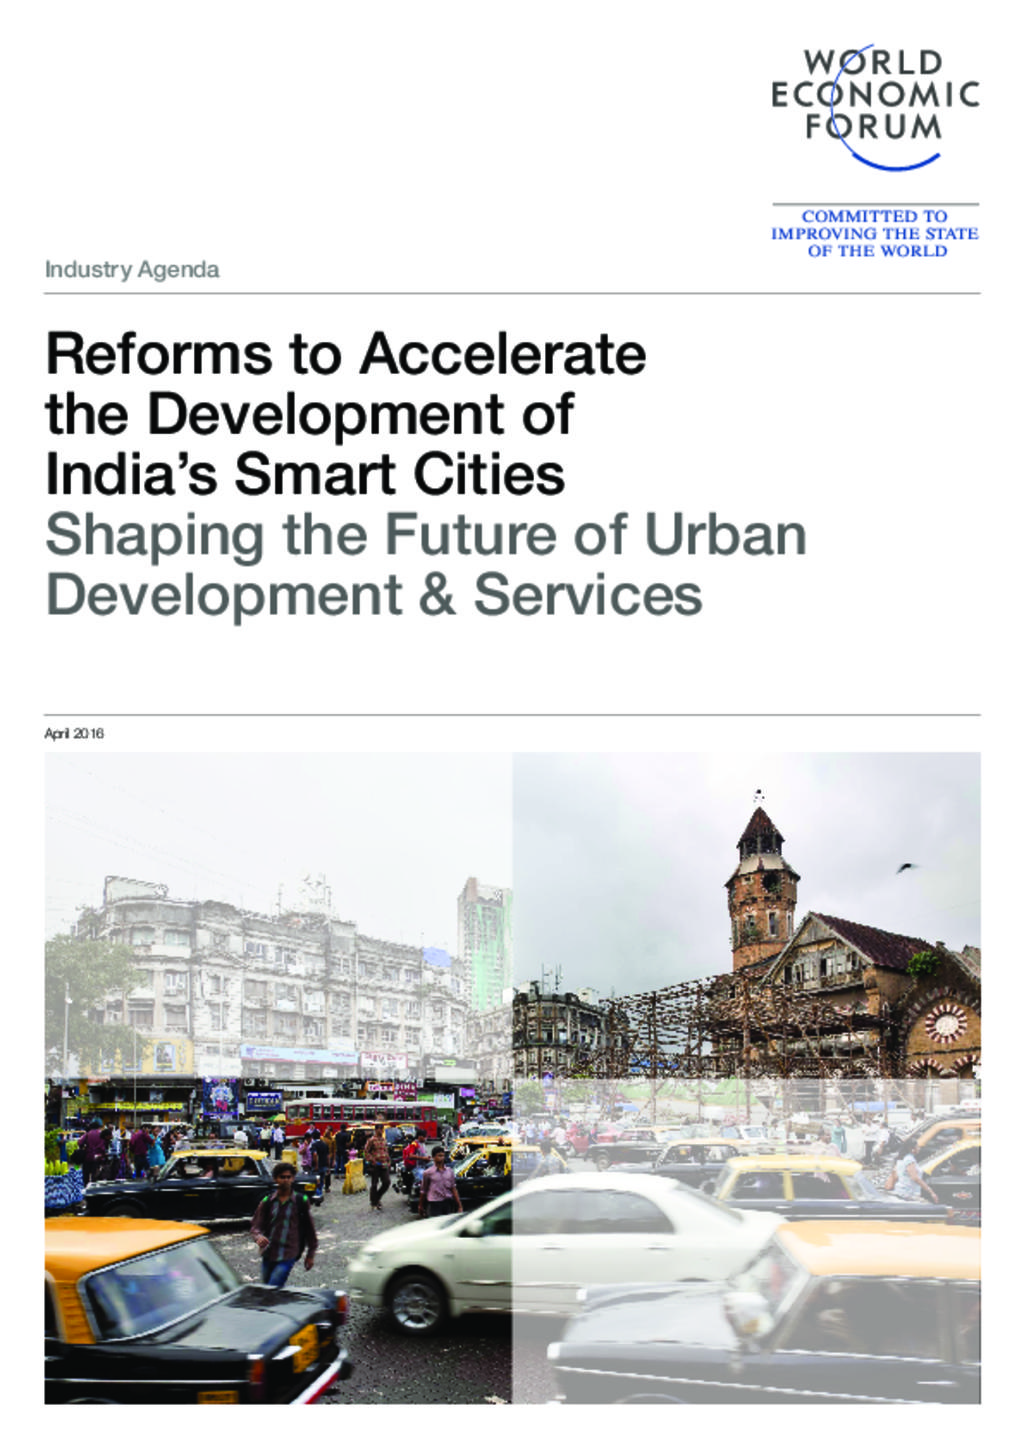 Reforms to Accelerate the Development of India’s Smart Cities - Shaping the Future of Urban Development & Services